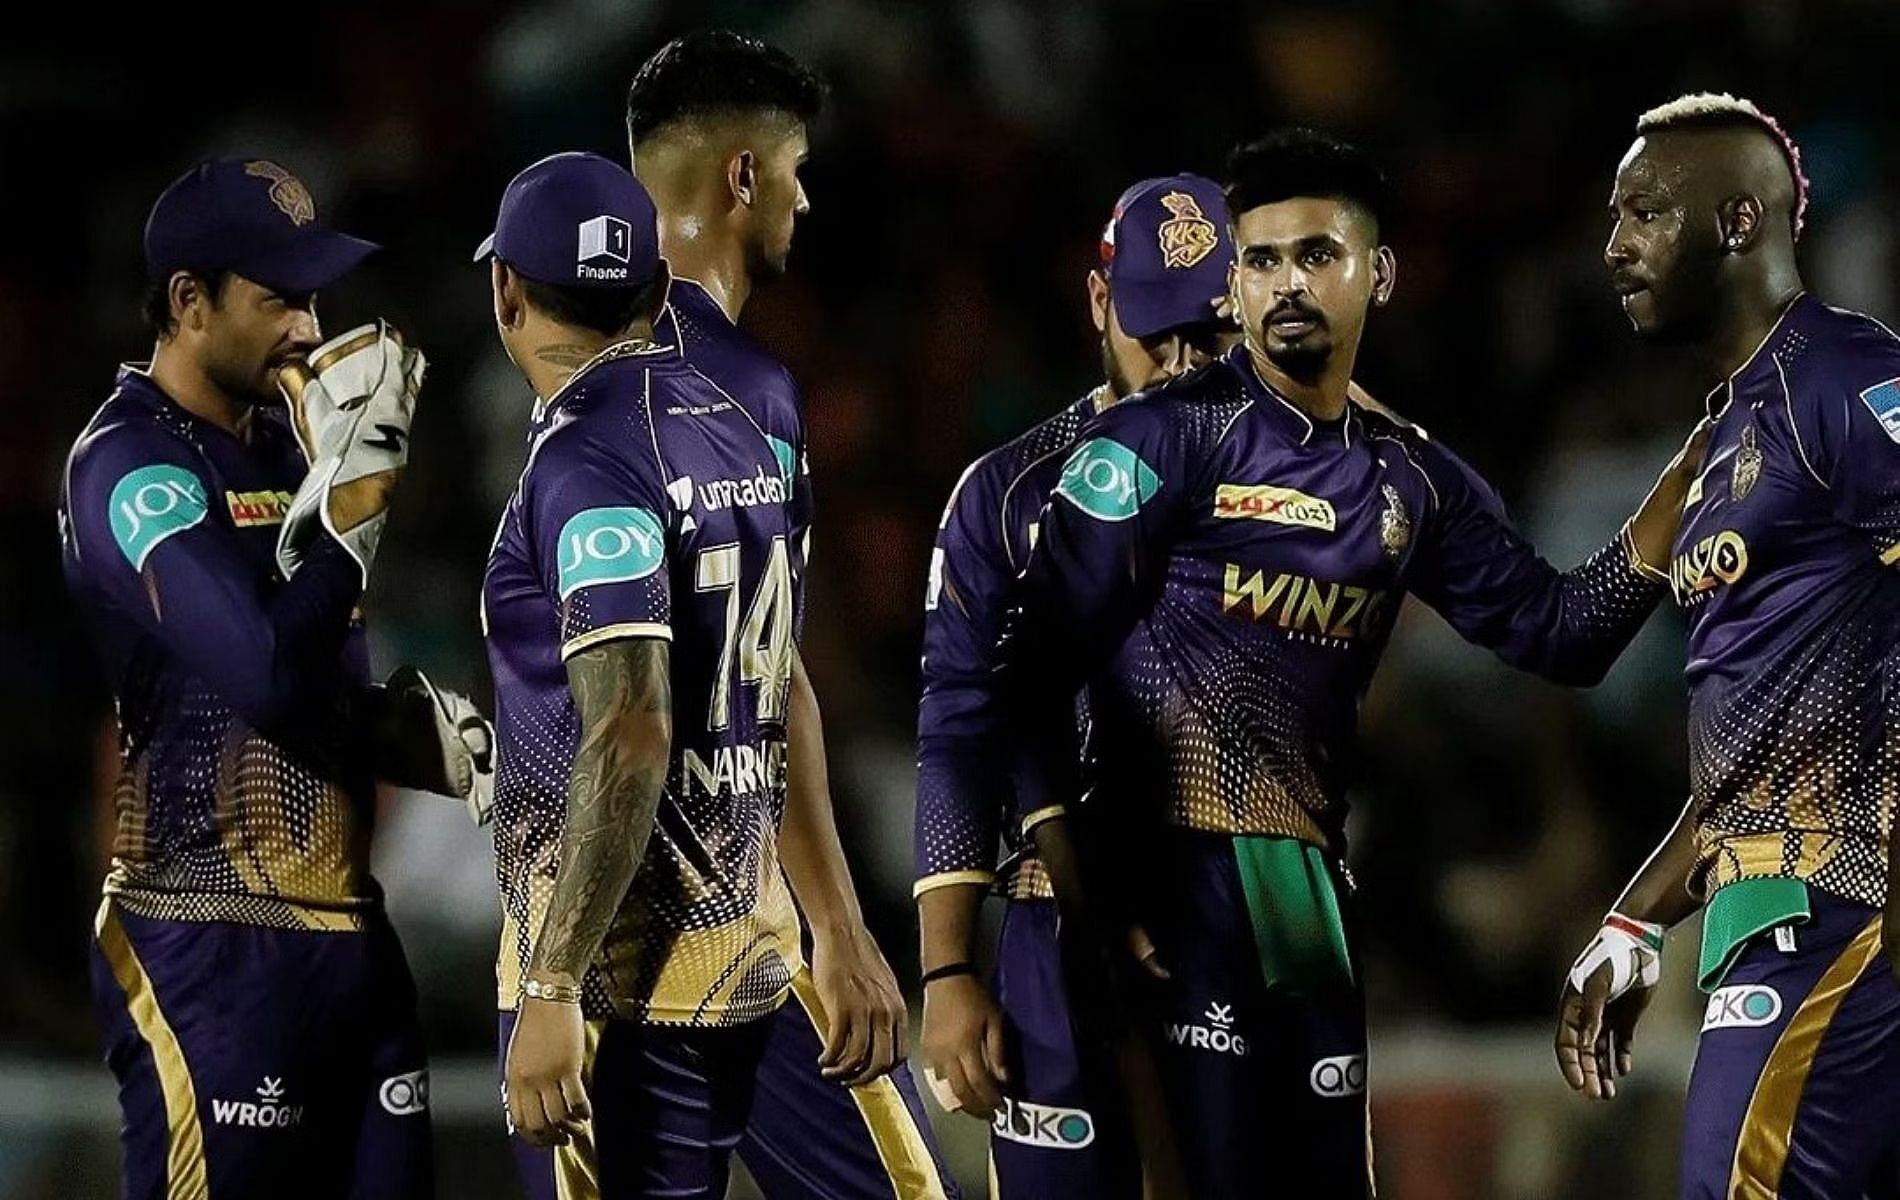 The Kolkata Knight Riders have the least remaining purse among all franchises. [P/C: iplt20.com]